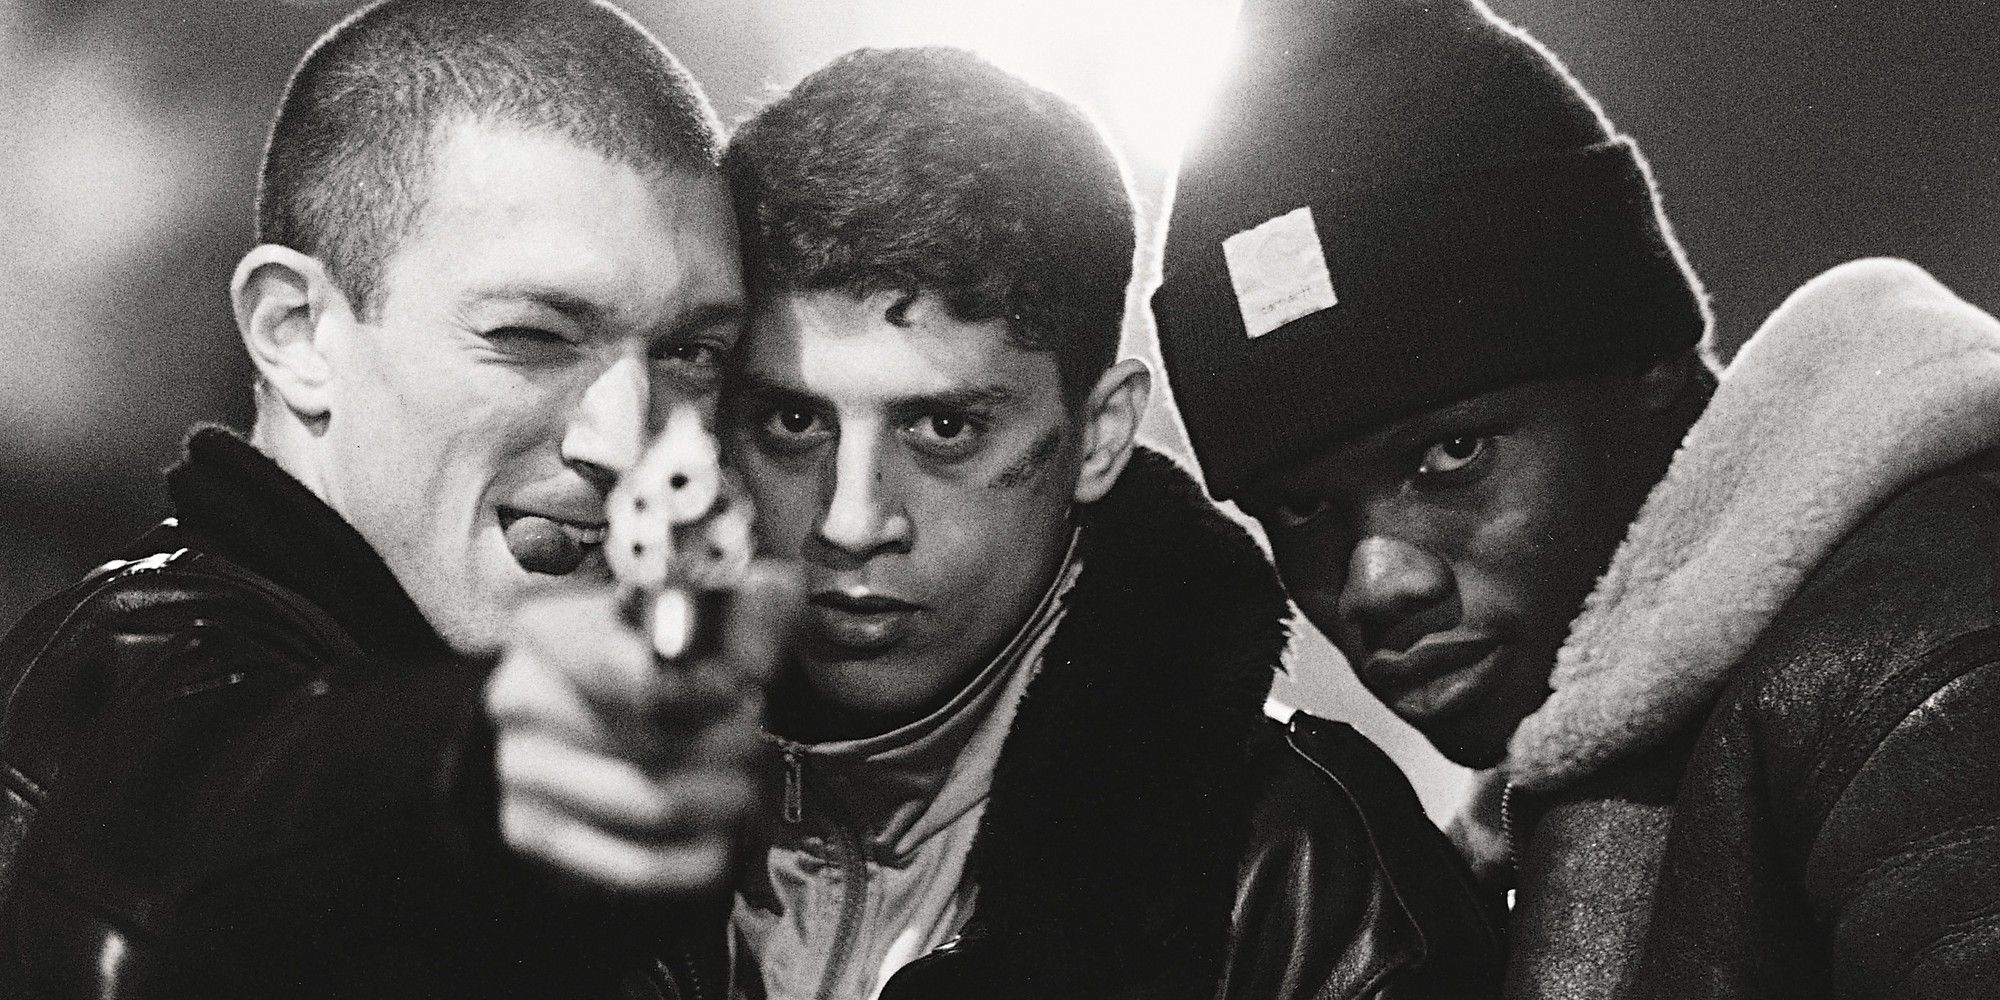 Vincent Cassel, Hubert Koundé and Saïd Taghmaoui looking at the camera in 'La haine'